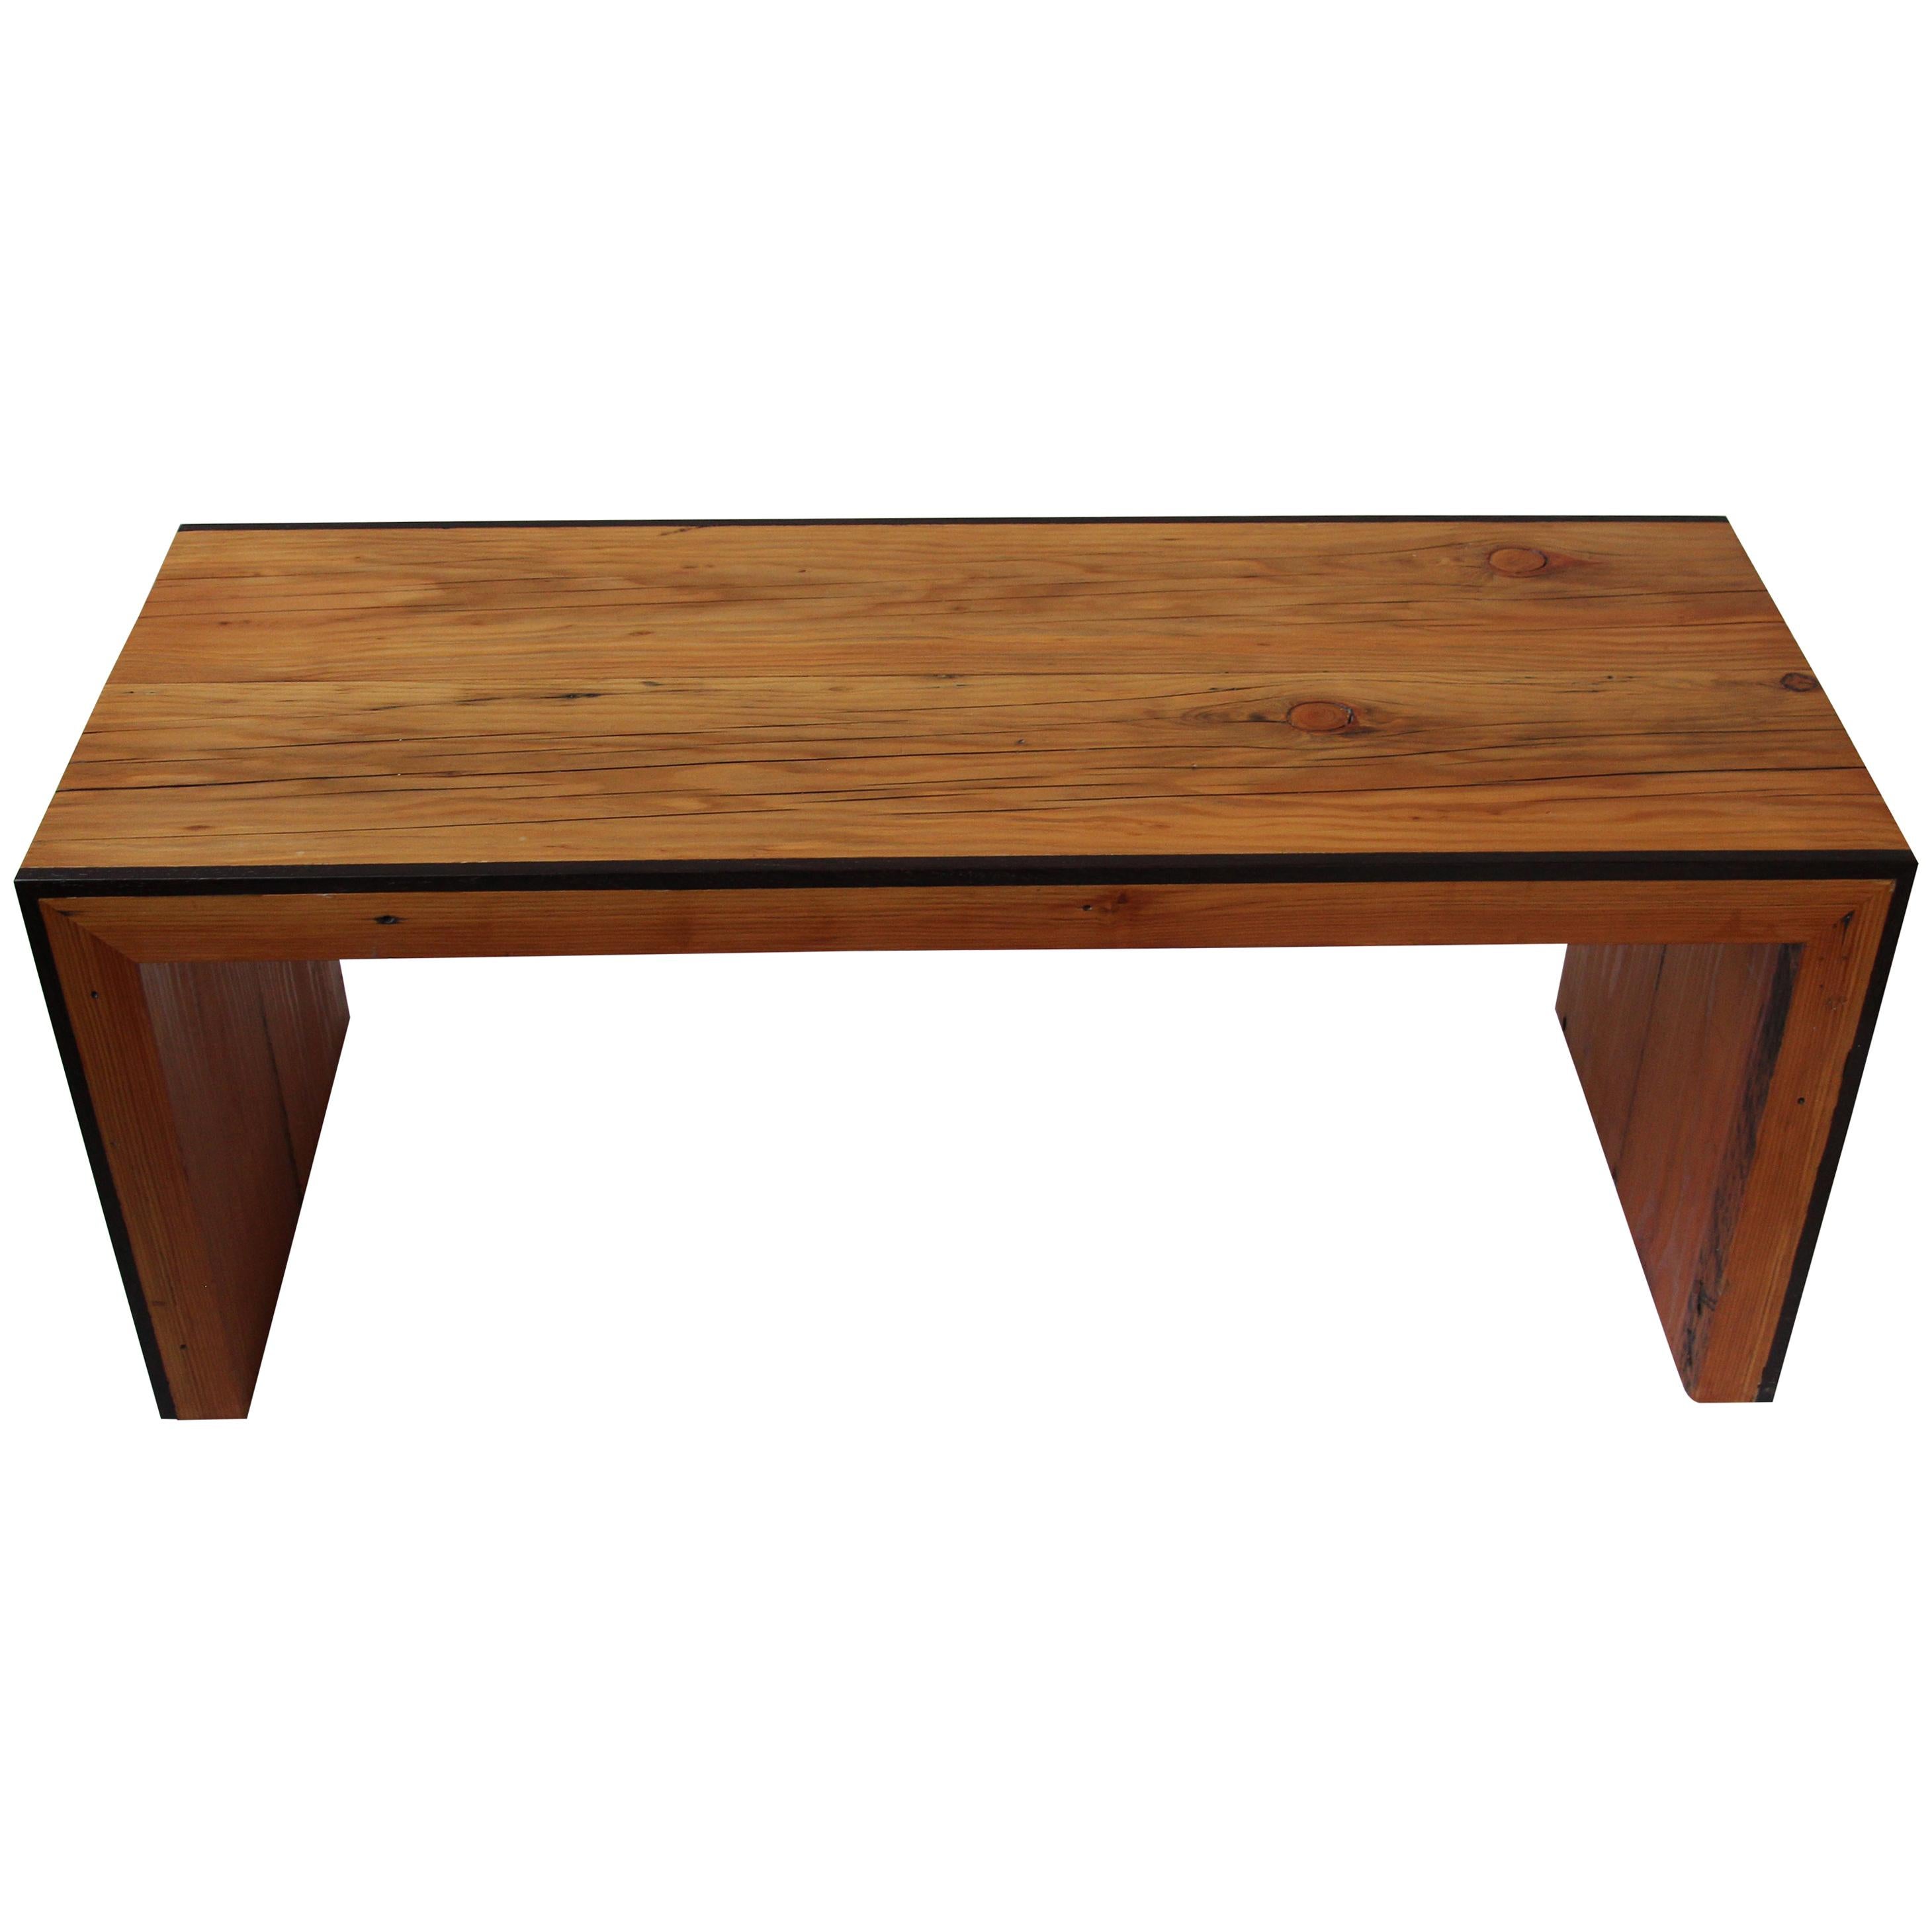 Monster Island Coffee Table Bench in Reclaimed Fir, Edged in Wengue - in stock